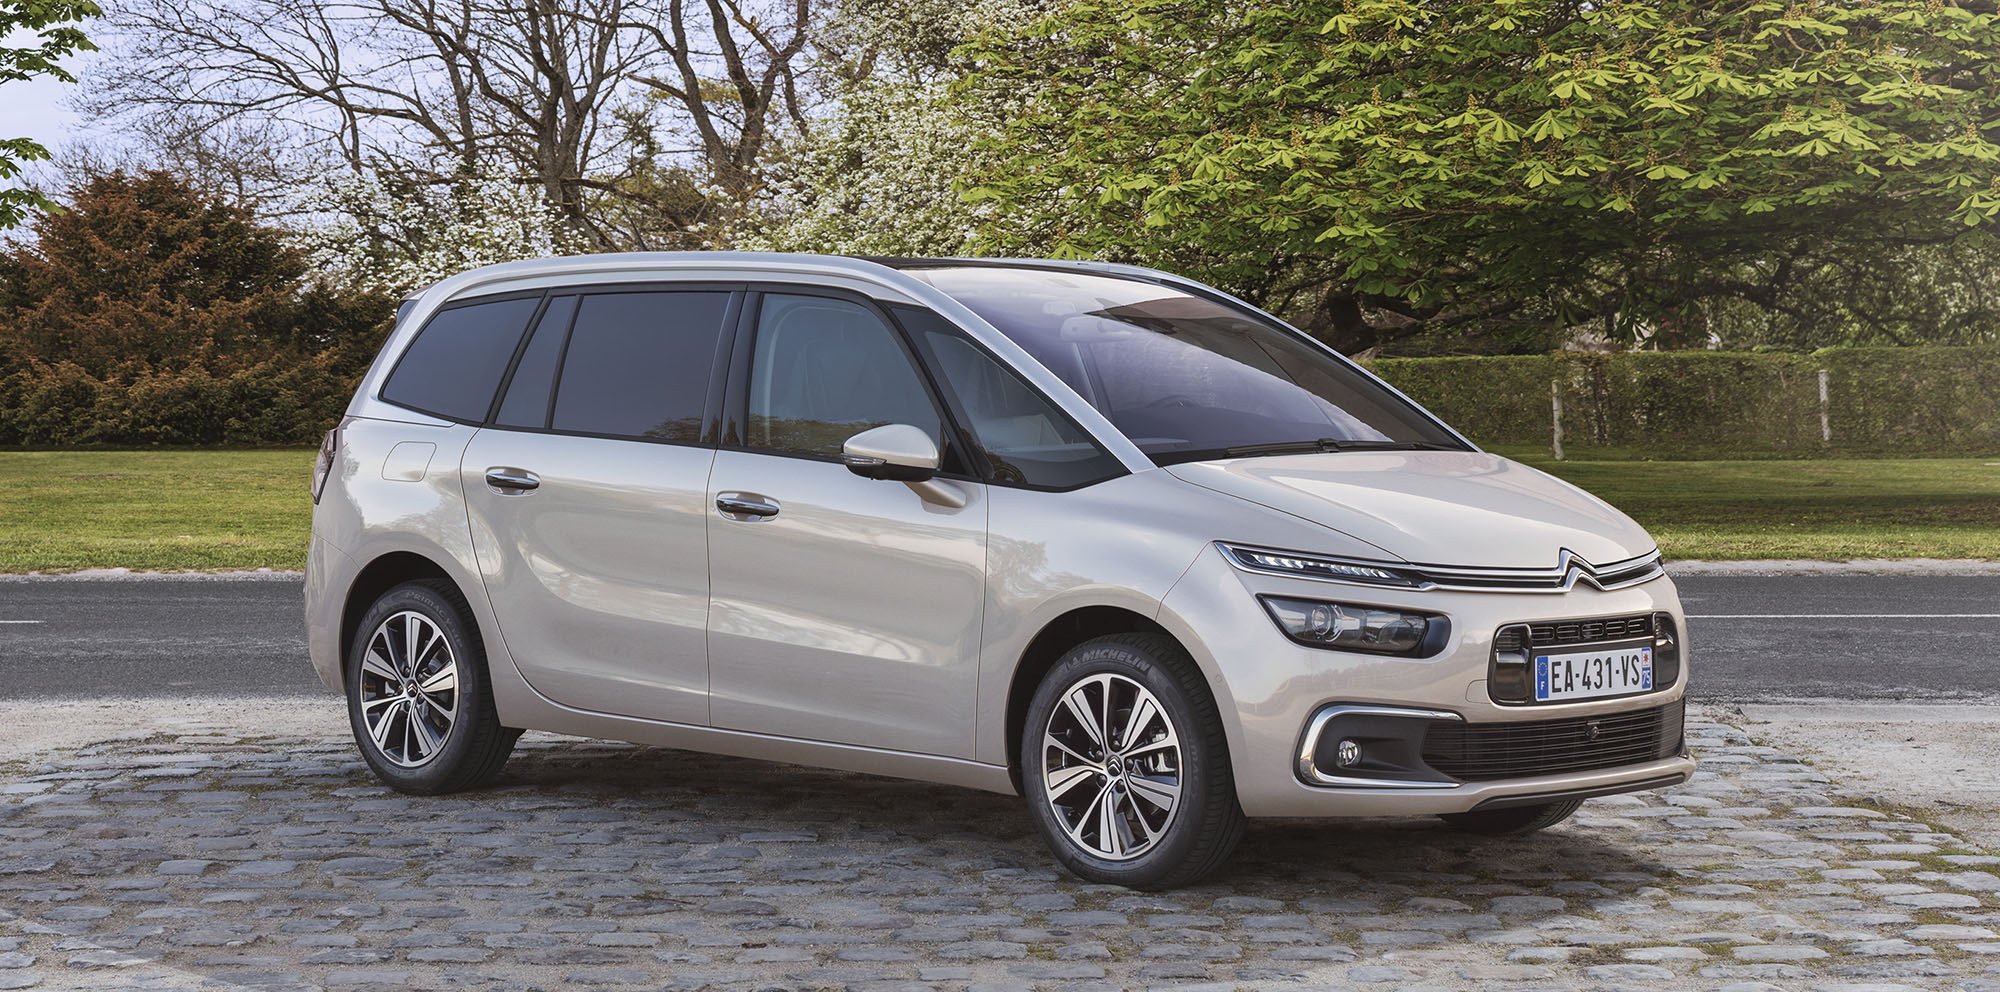 Citroen C4-Picasso  2.0 AT (150 HP) Compact